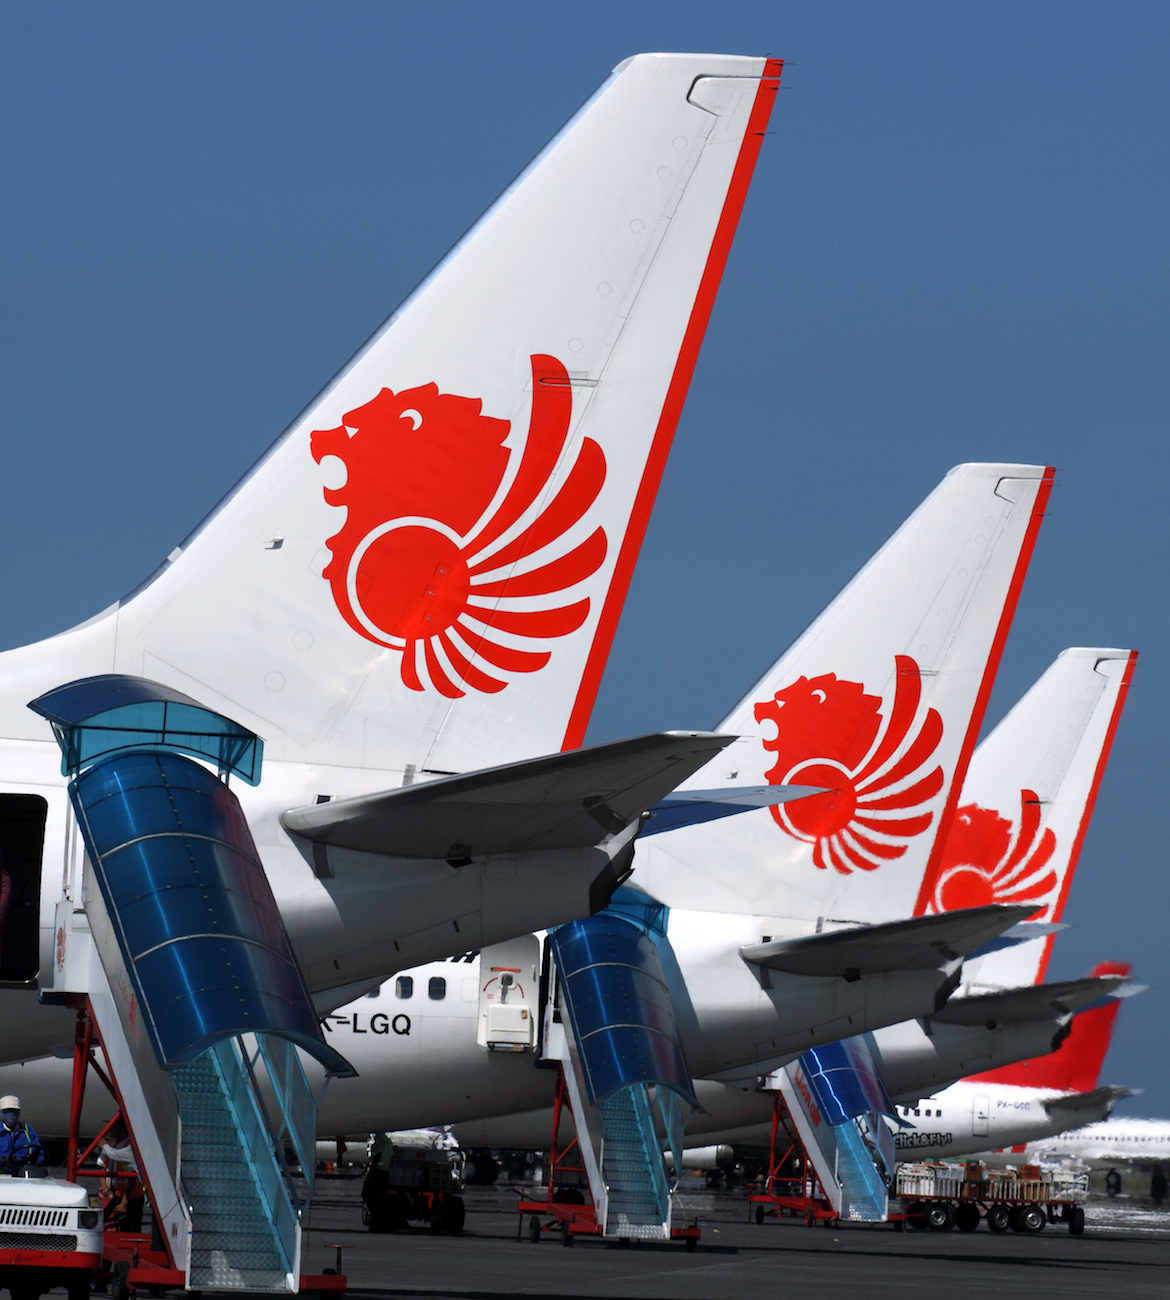 Indonesia’s Lion Air has more than 400 jets on order. (Rob Finlayson)